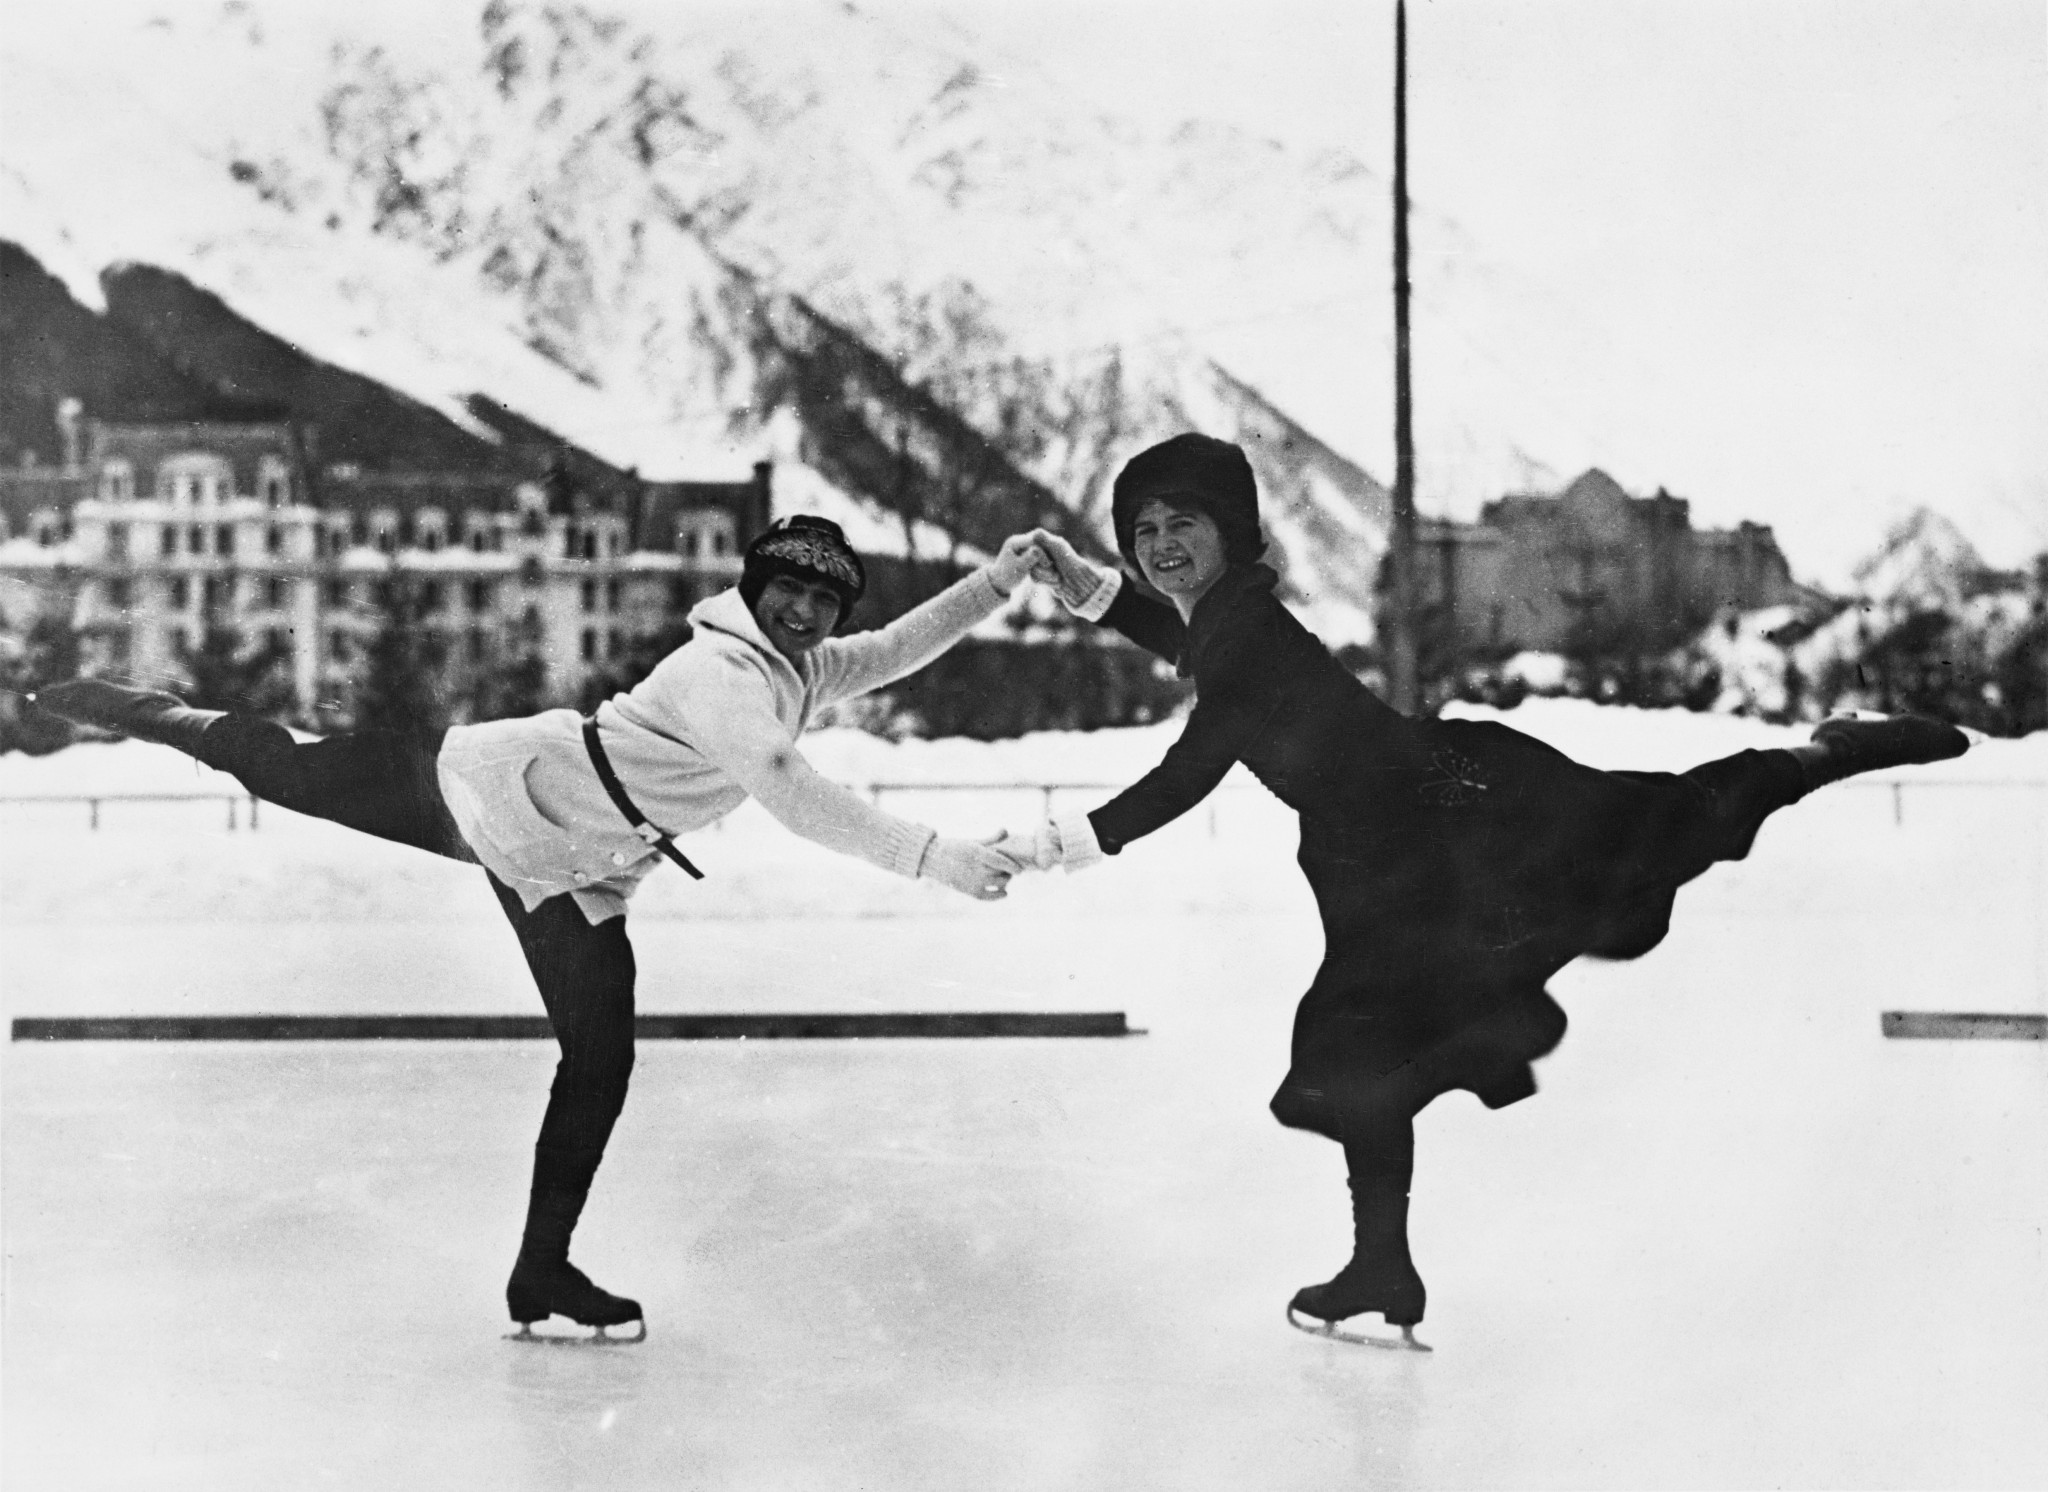 When figure skating was contested at the Chamonix 1924 Winter Olympics, competition took place on an outdoor ice rink ©Getty Images